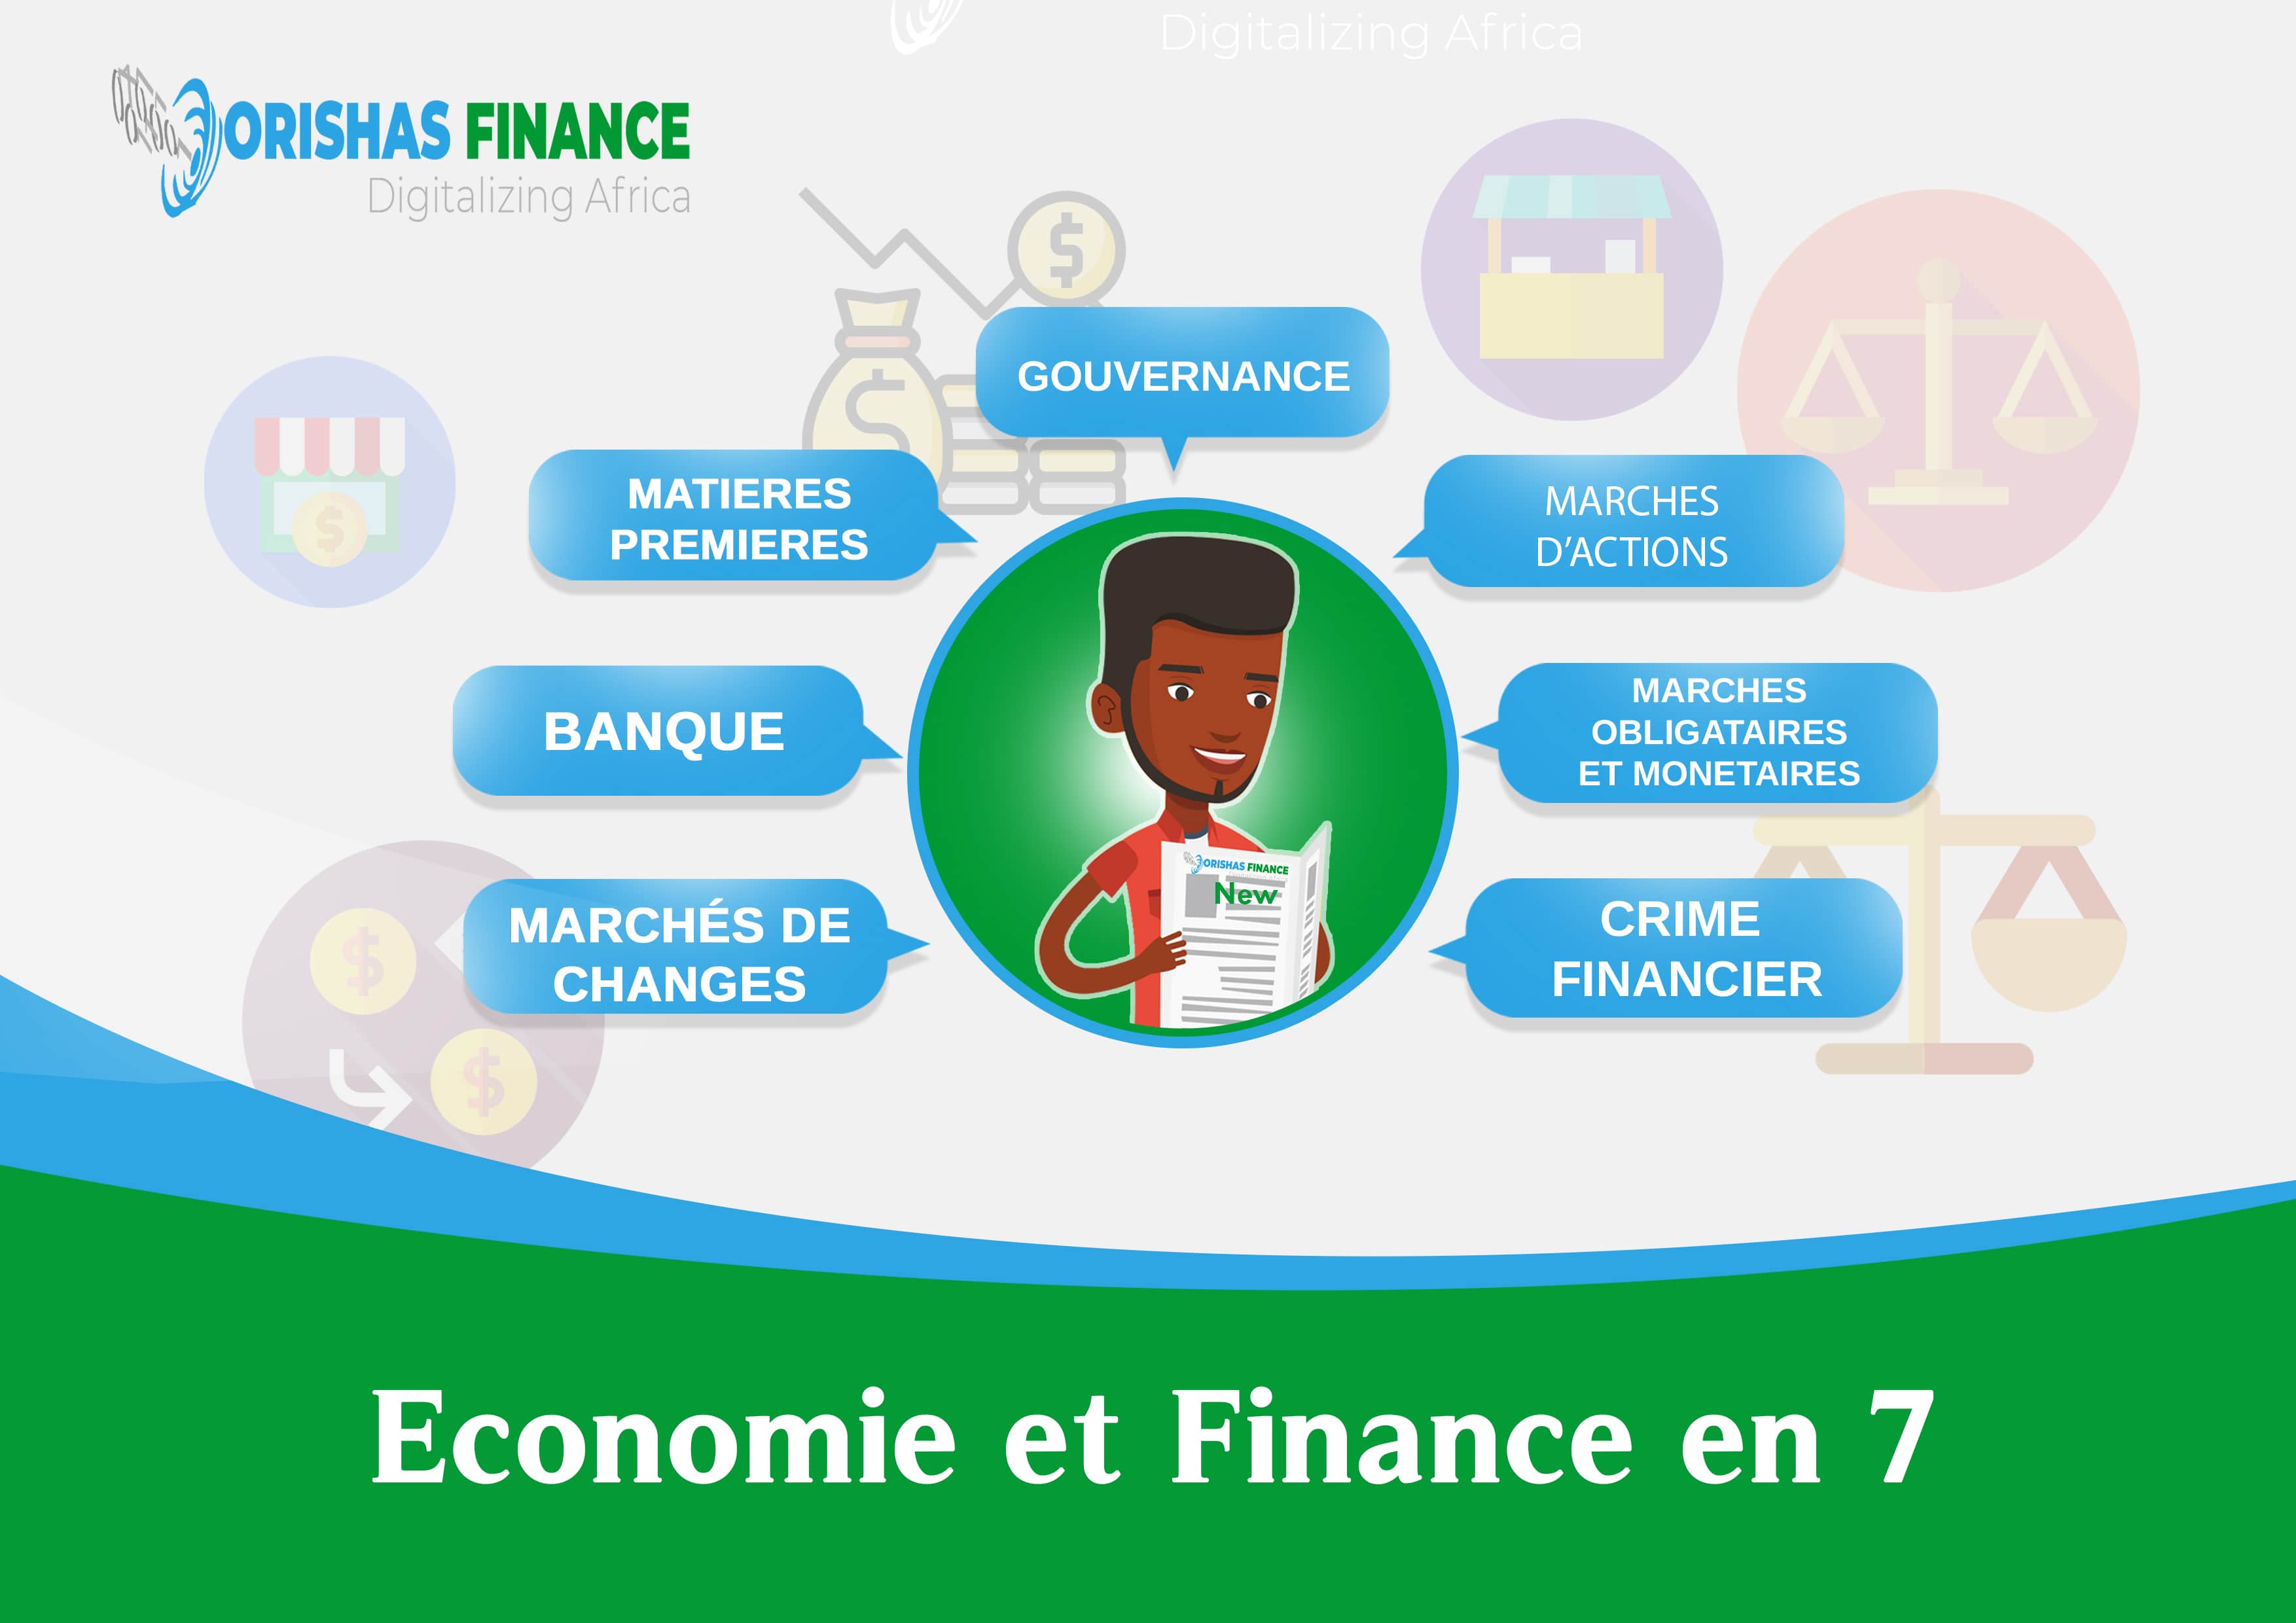  Economy and finance in 7 from March 29 to April 02, 2021 